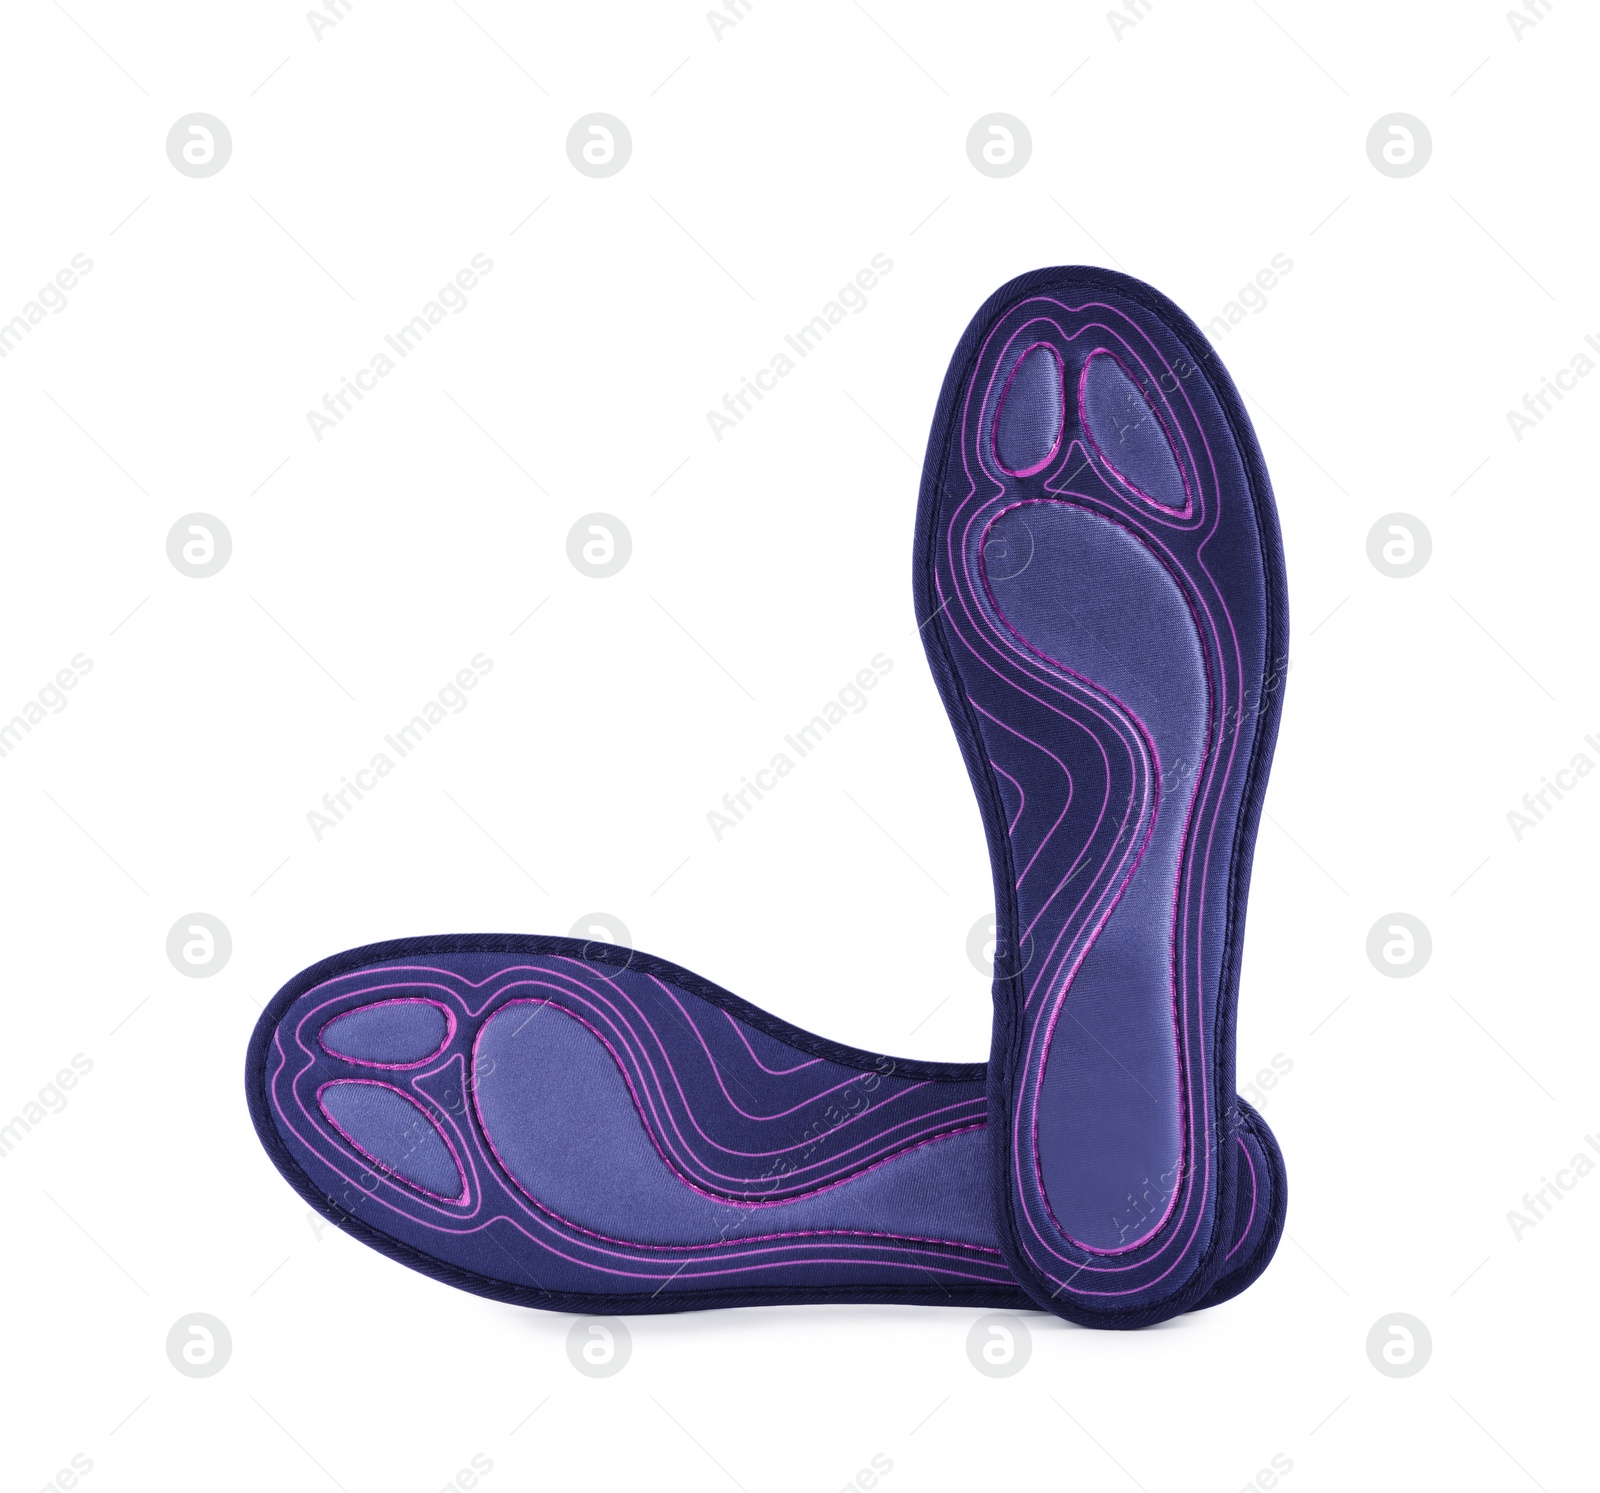 Image of Pair of color orthopedic insoles isolated on white